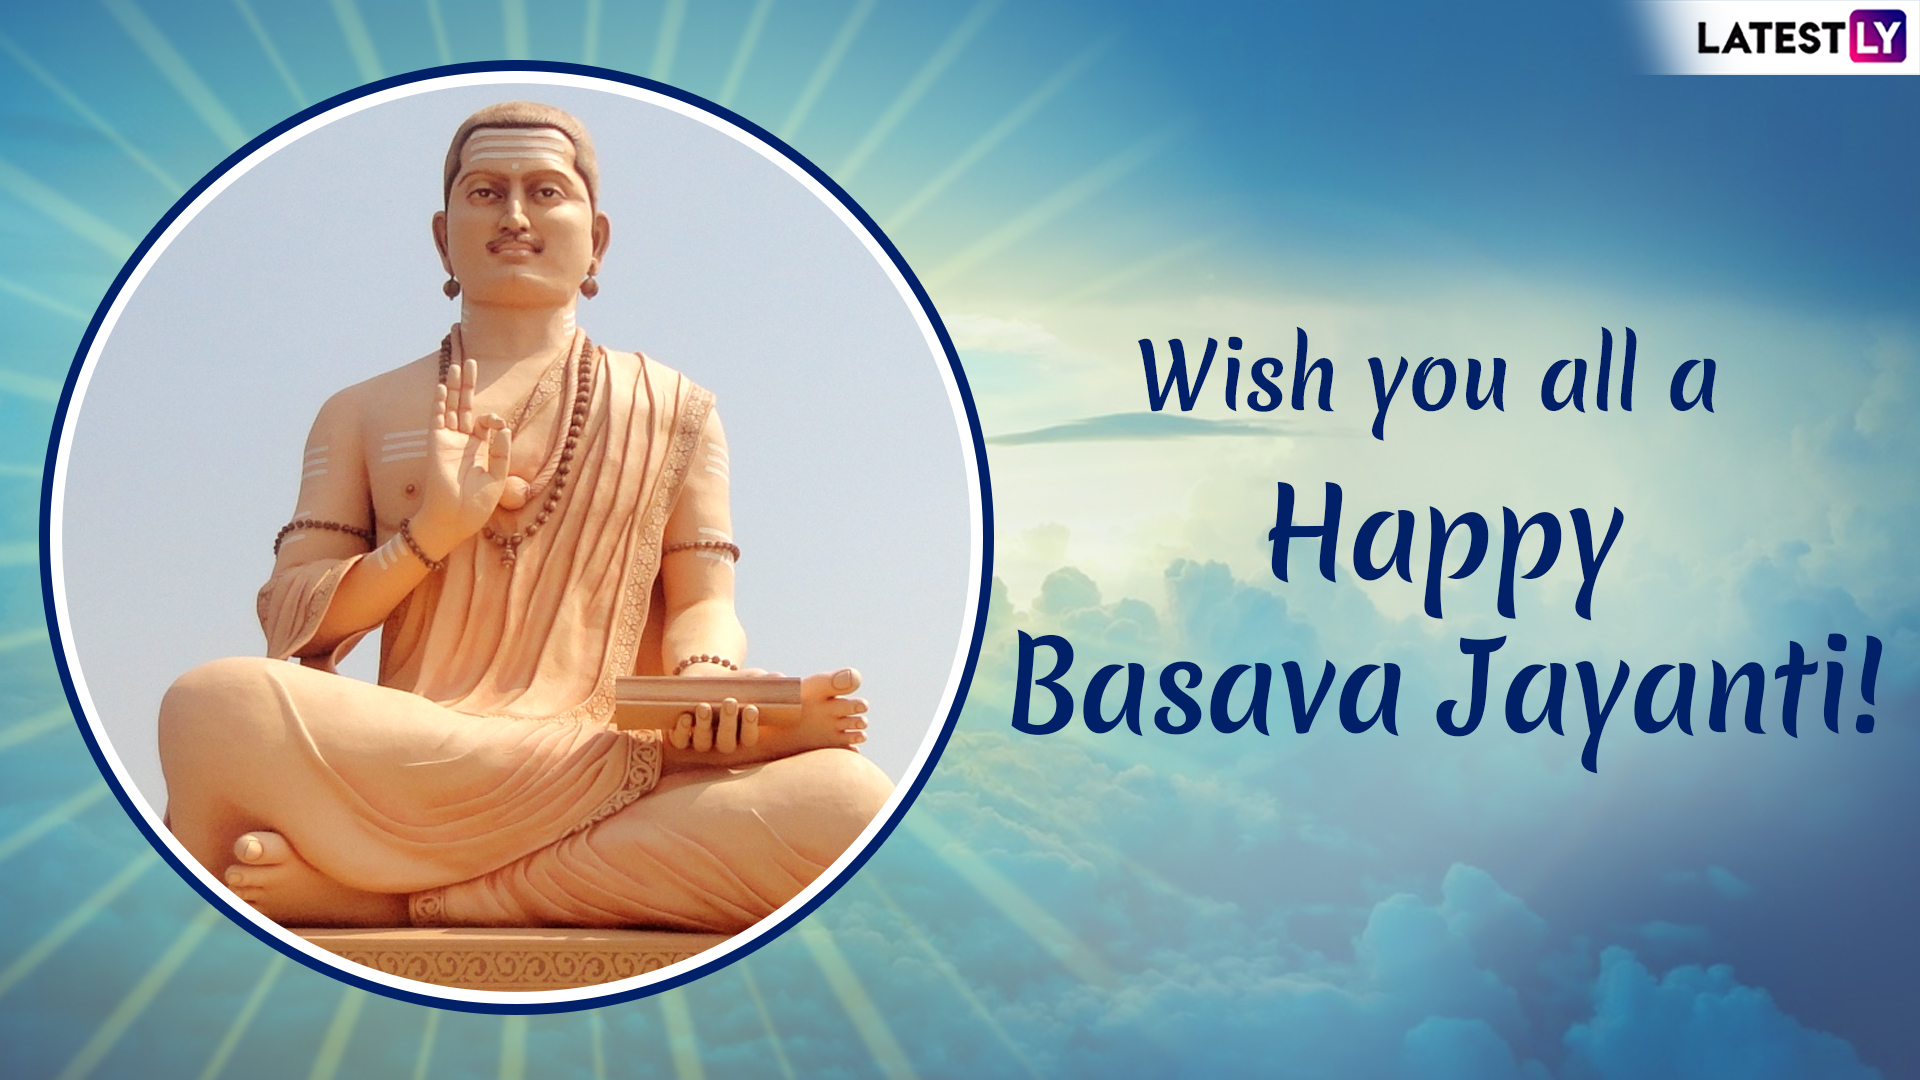 Basava Jayanti 2021 Greetings & Wishes: HD Images, Messages, Quotes, Lord Basavanna  Pics To Share on the Birth Anniversary of the Lingayat Sect Founder | 🙏🏻  LatestLY